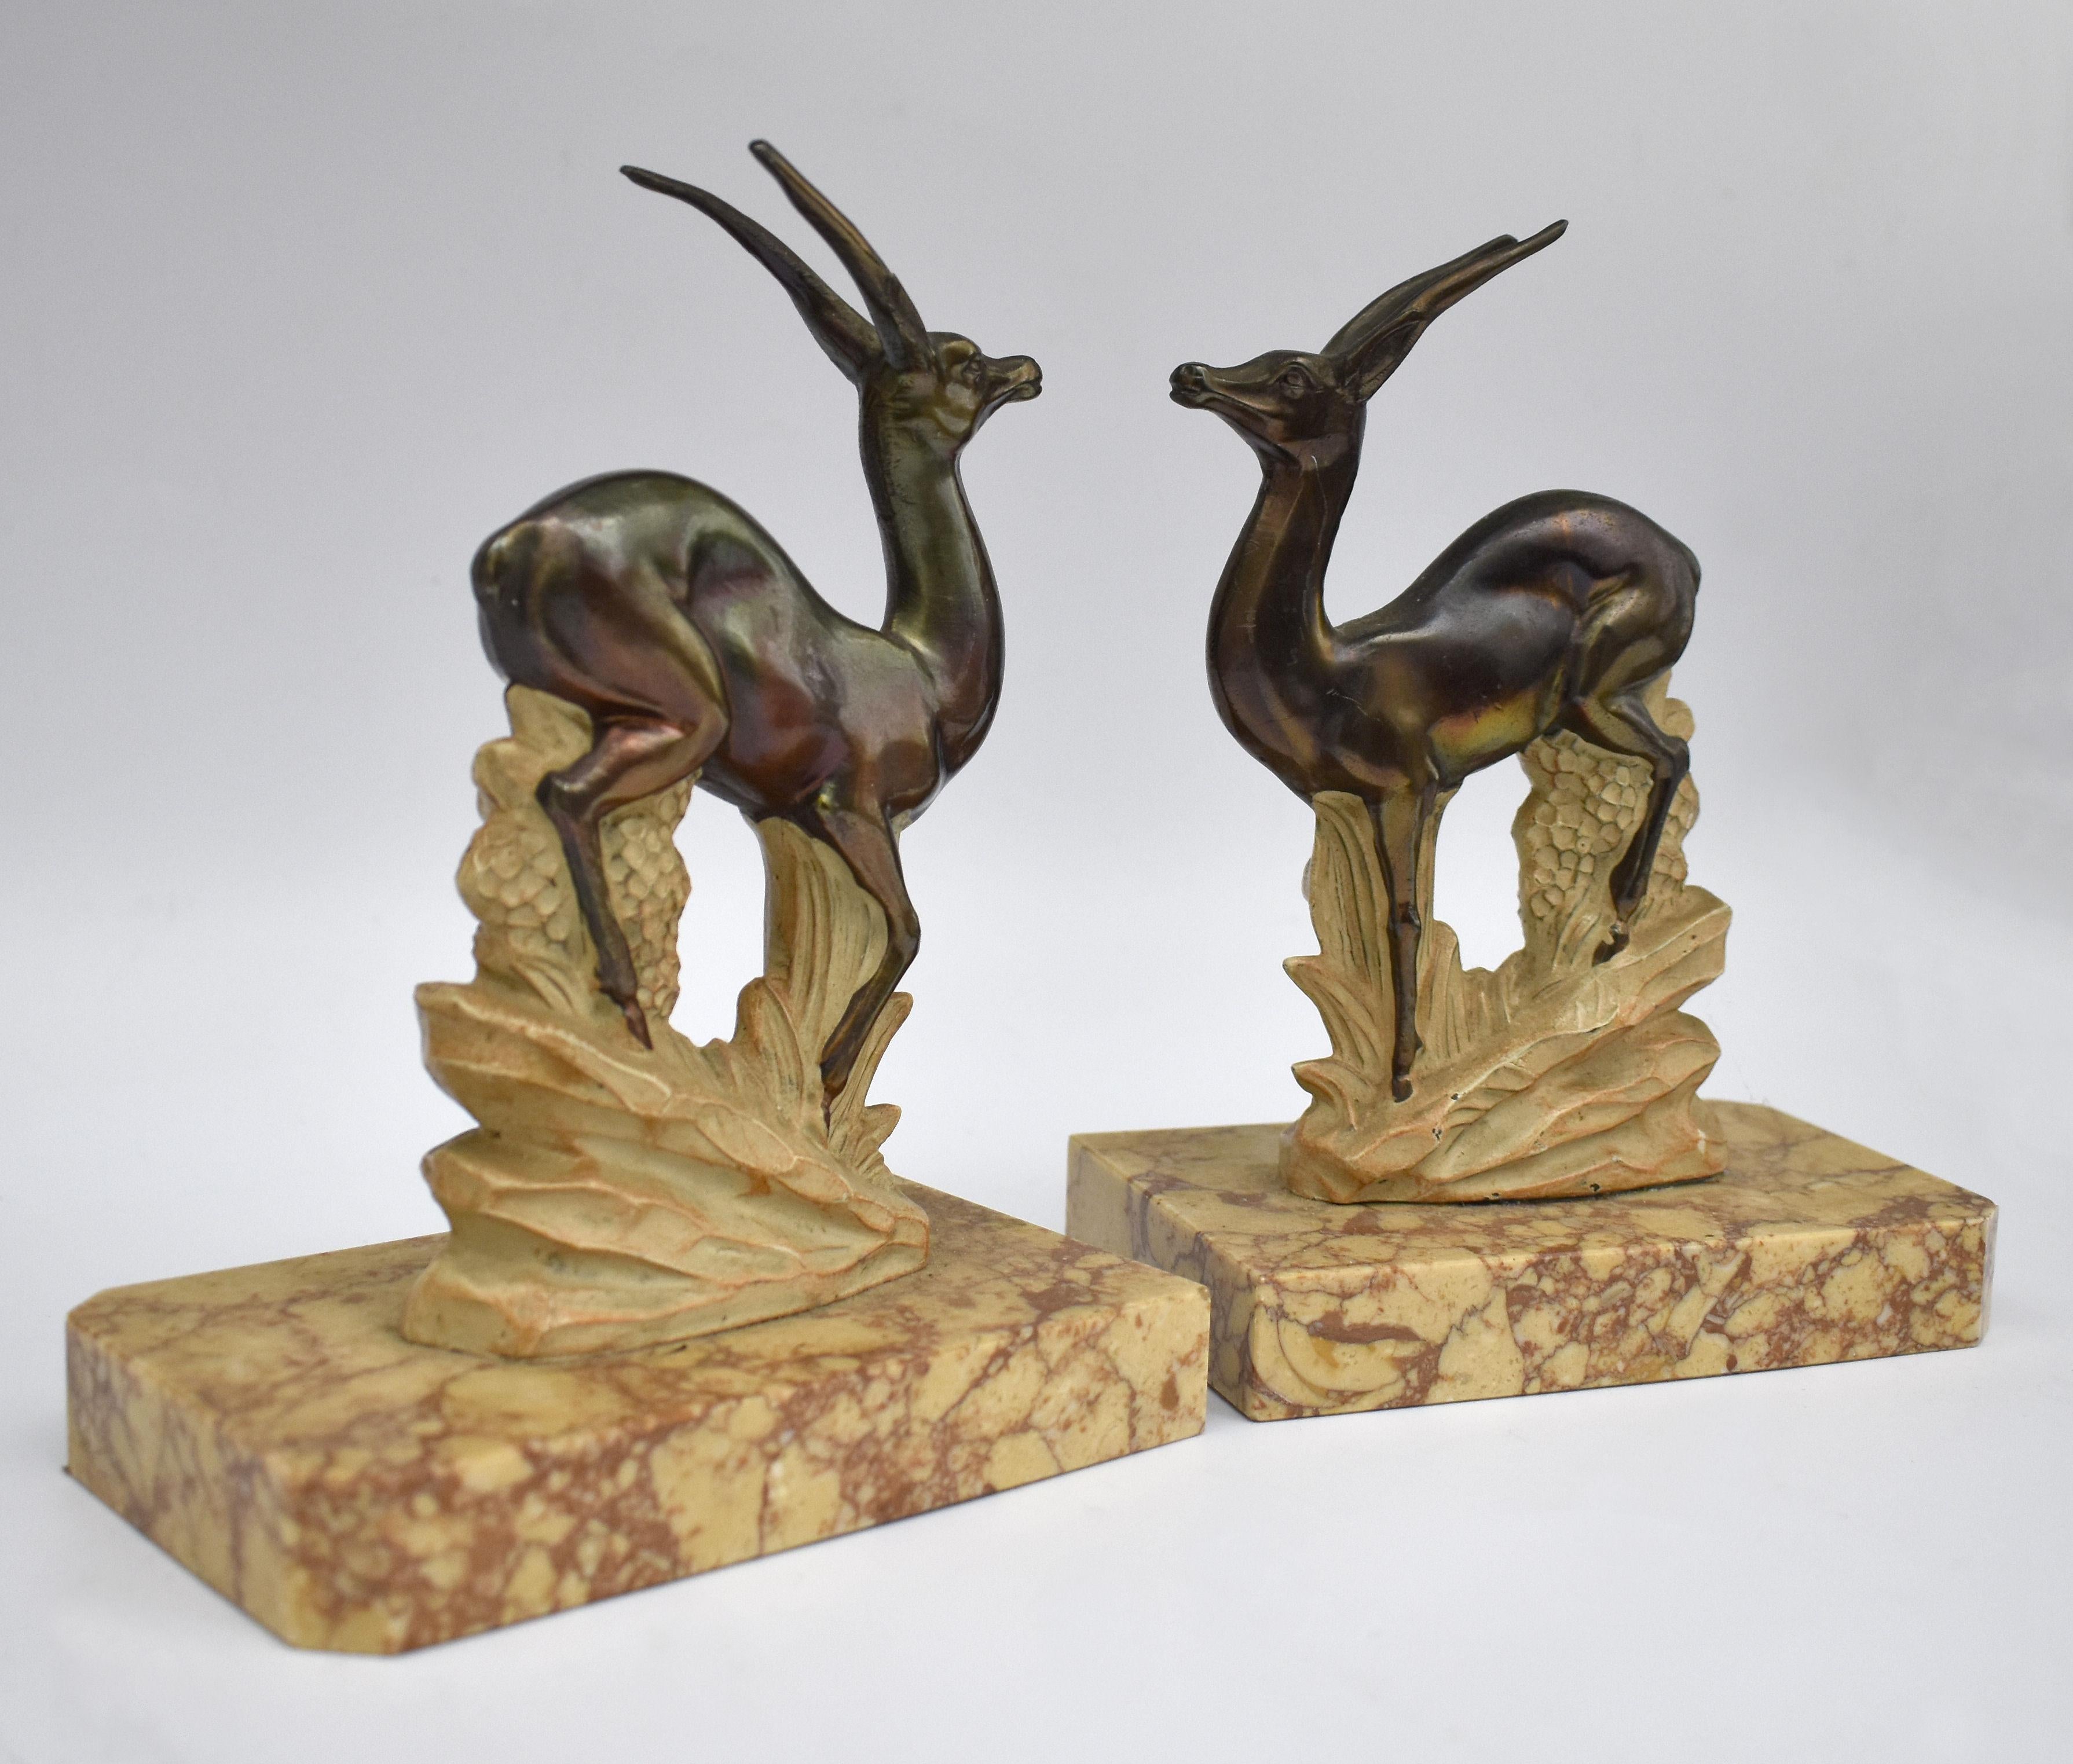 20th Century Art Deco Pair of Matching Figurative Bookends, C1930